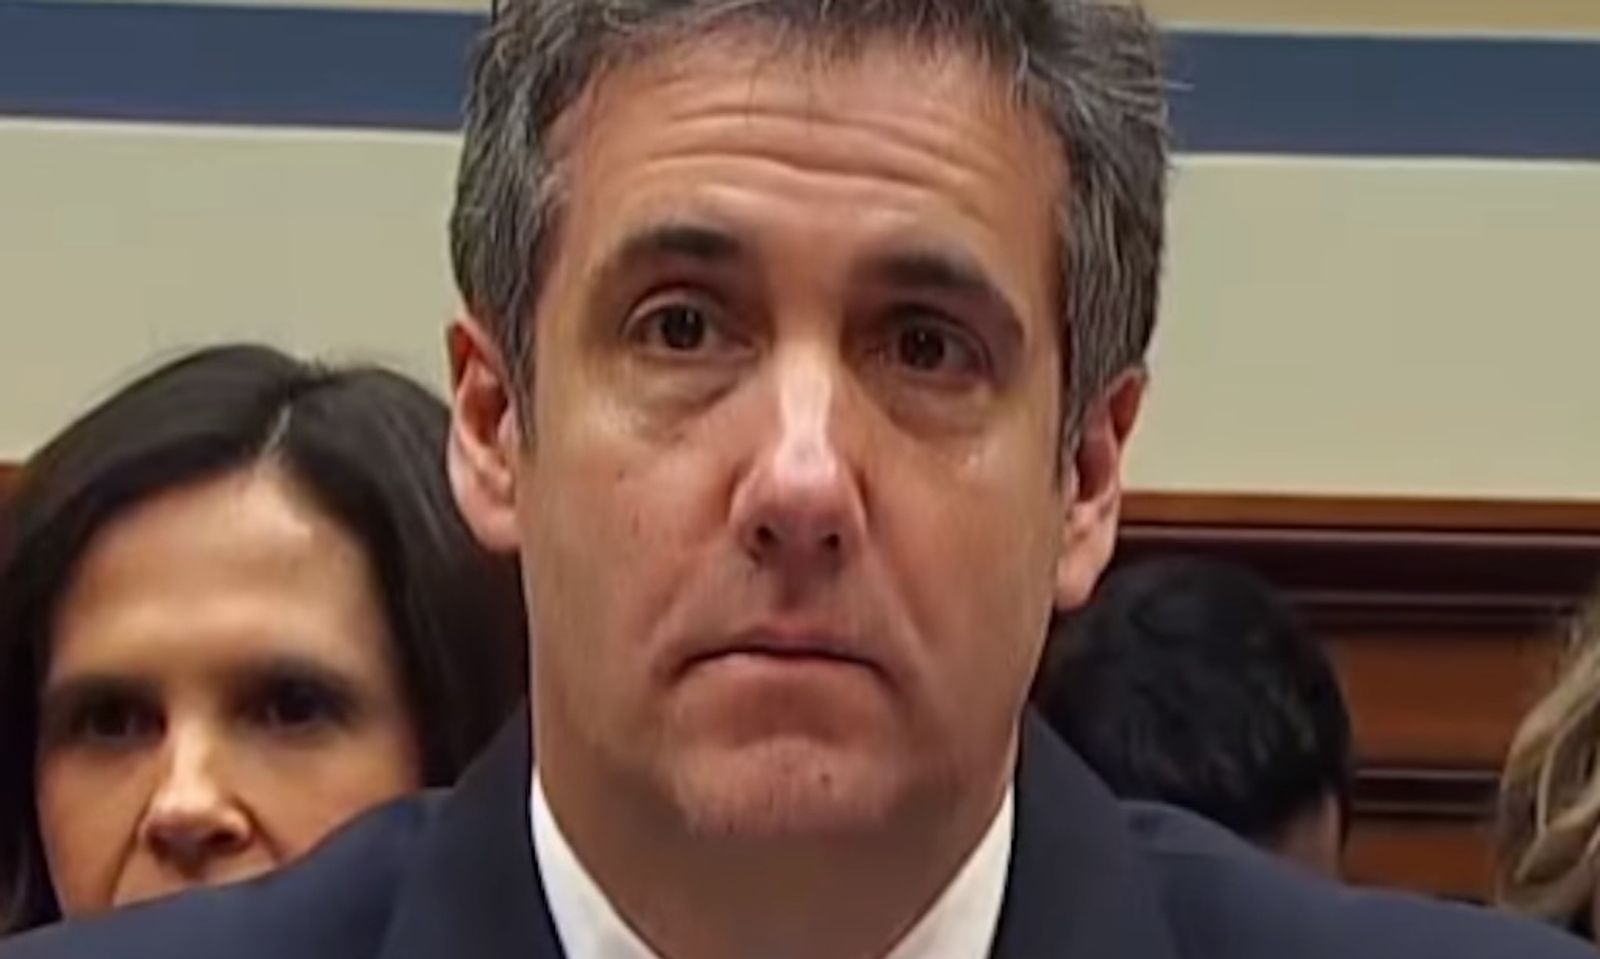 AT&T Paid Michael Cohen for ‘Advice’ on Net Neutrality, Docs Show